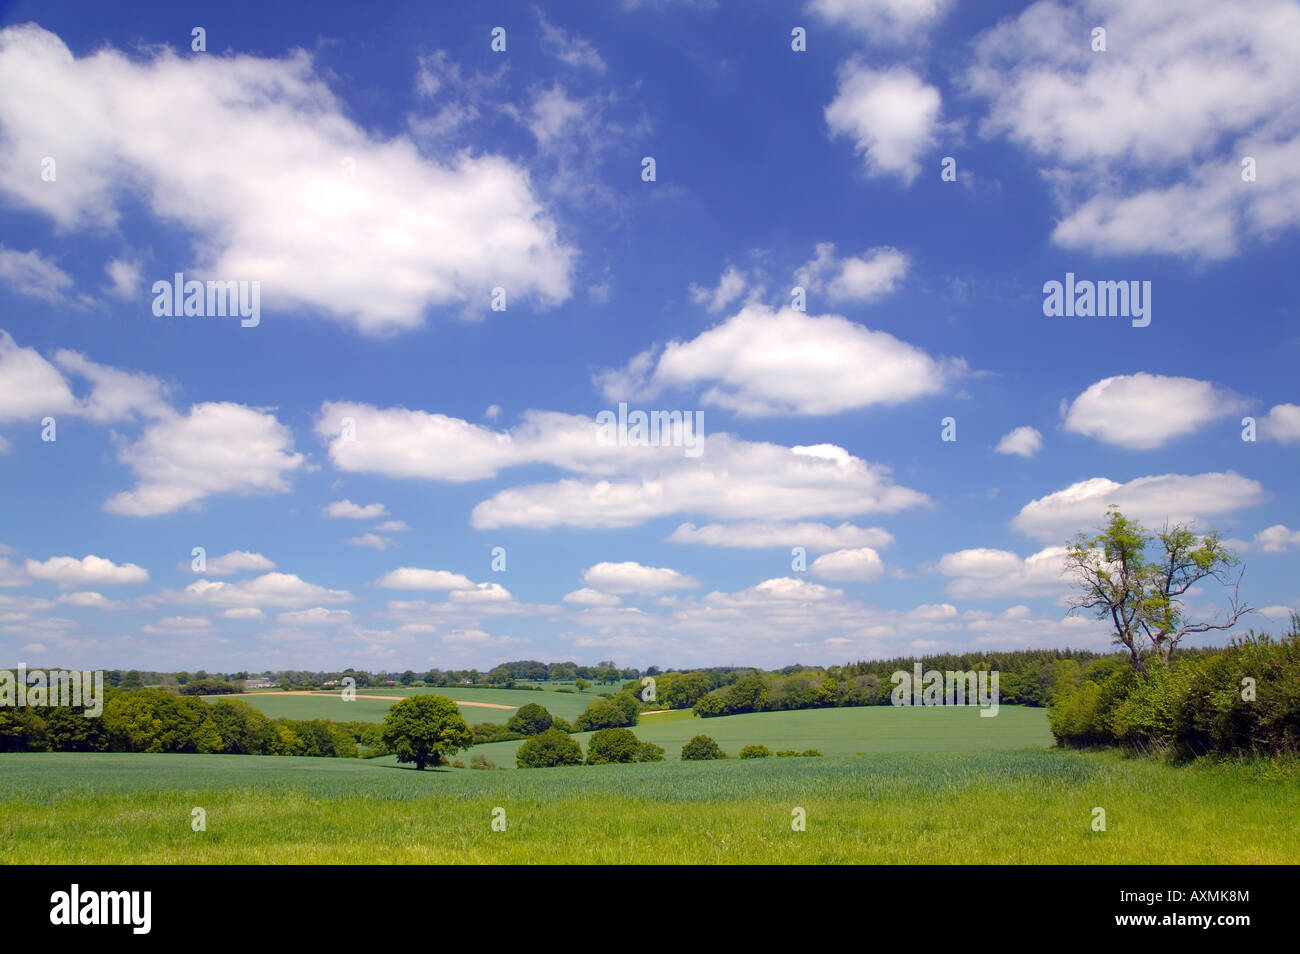 Landscape image of fields hills trees and a bright blue cloudy sky Stock Photo